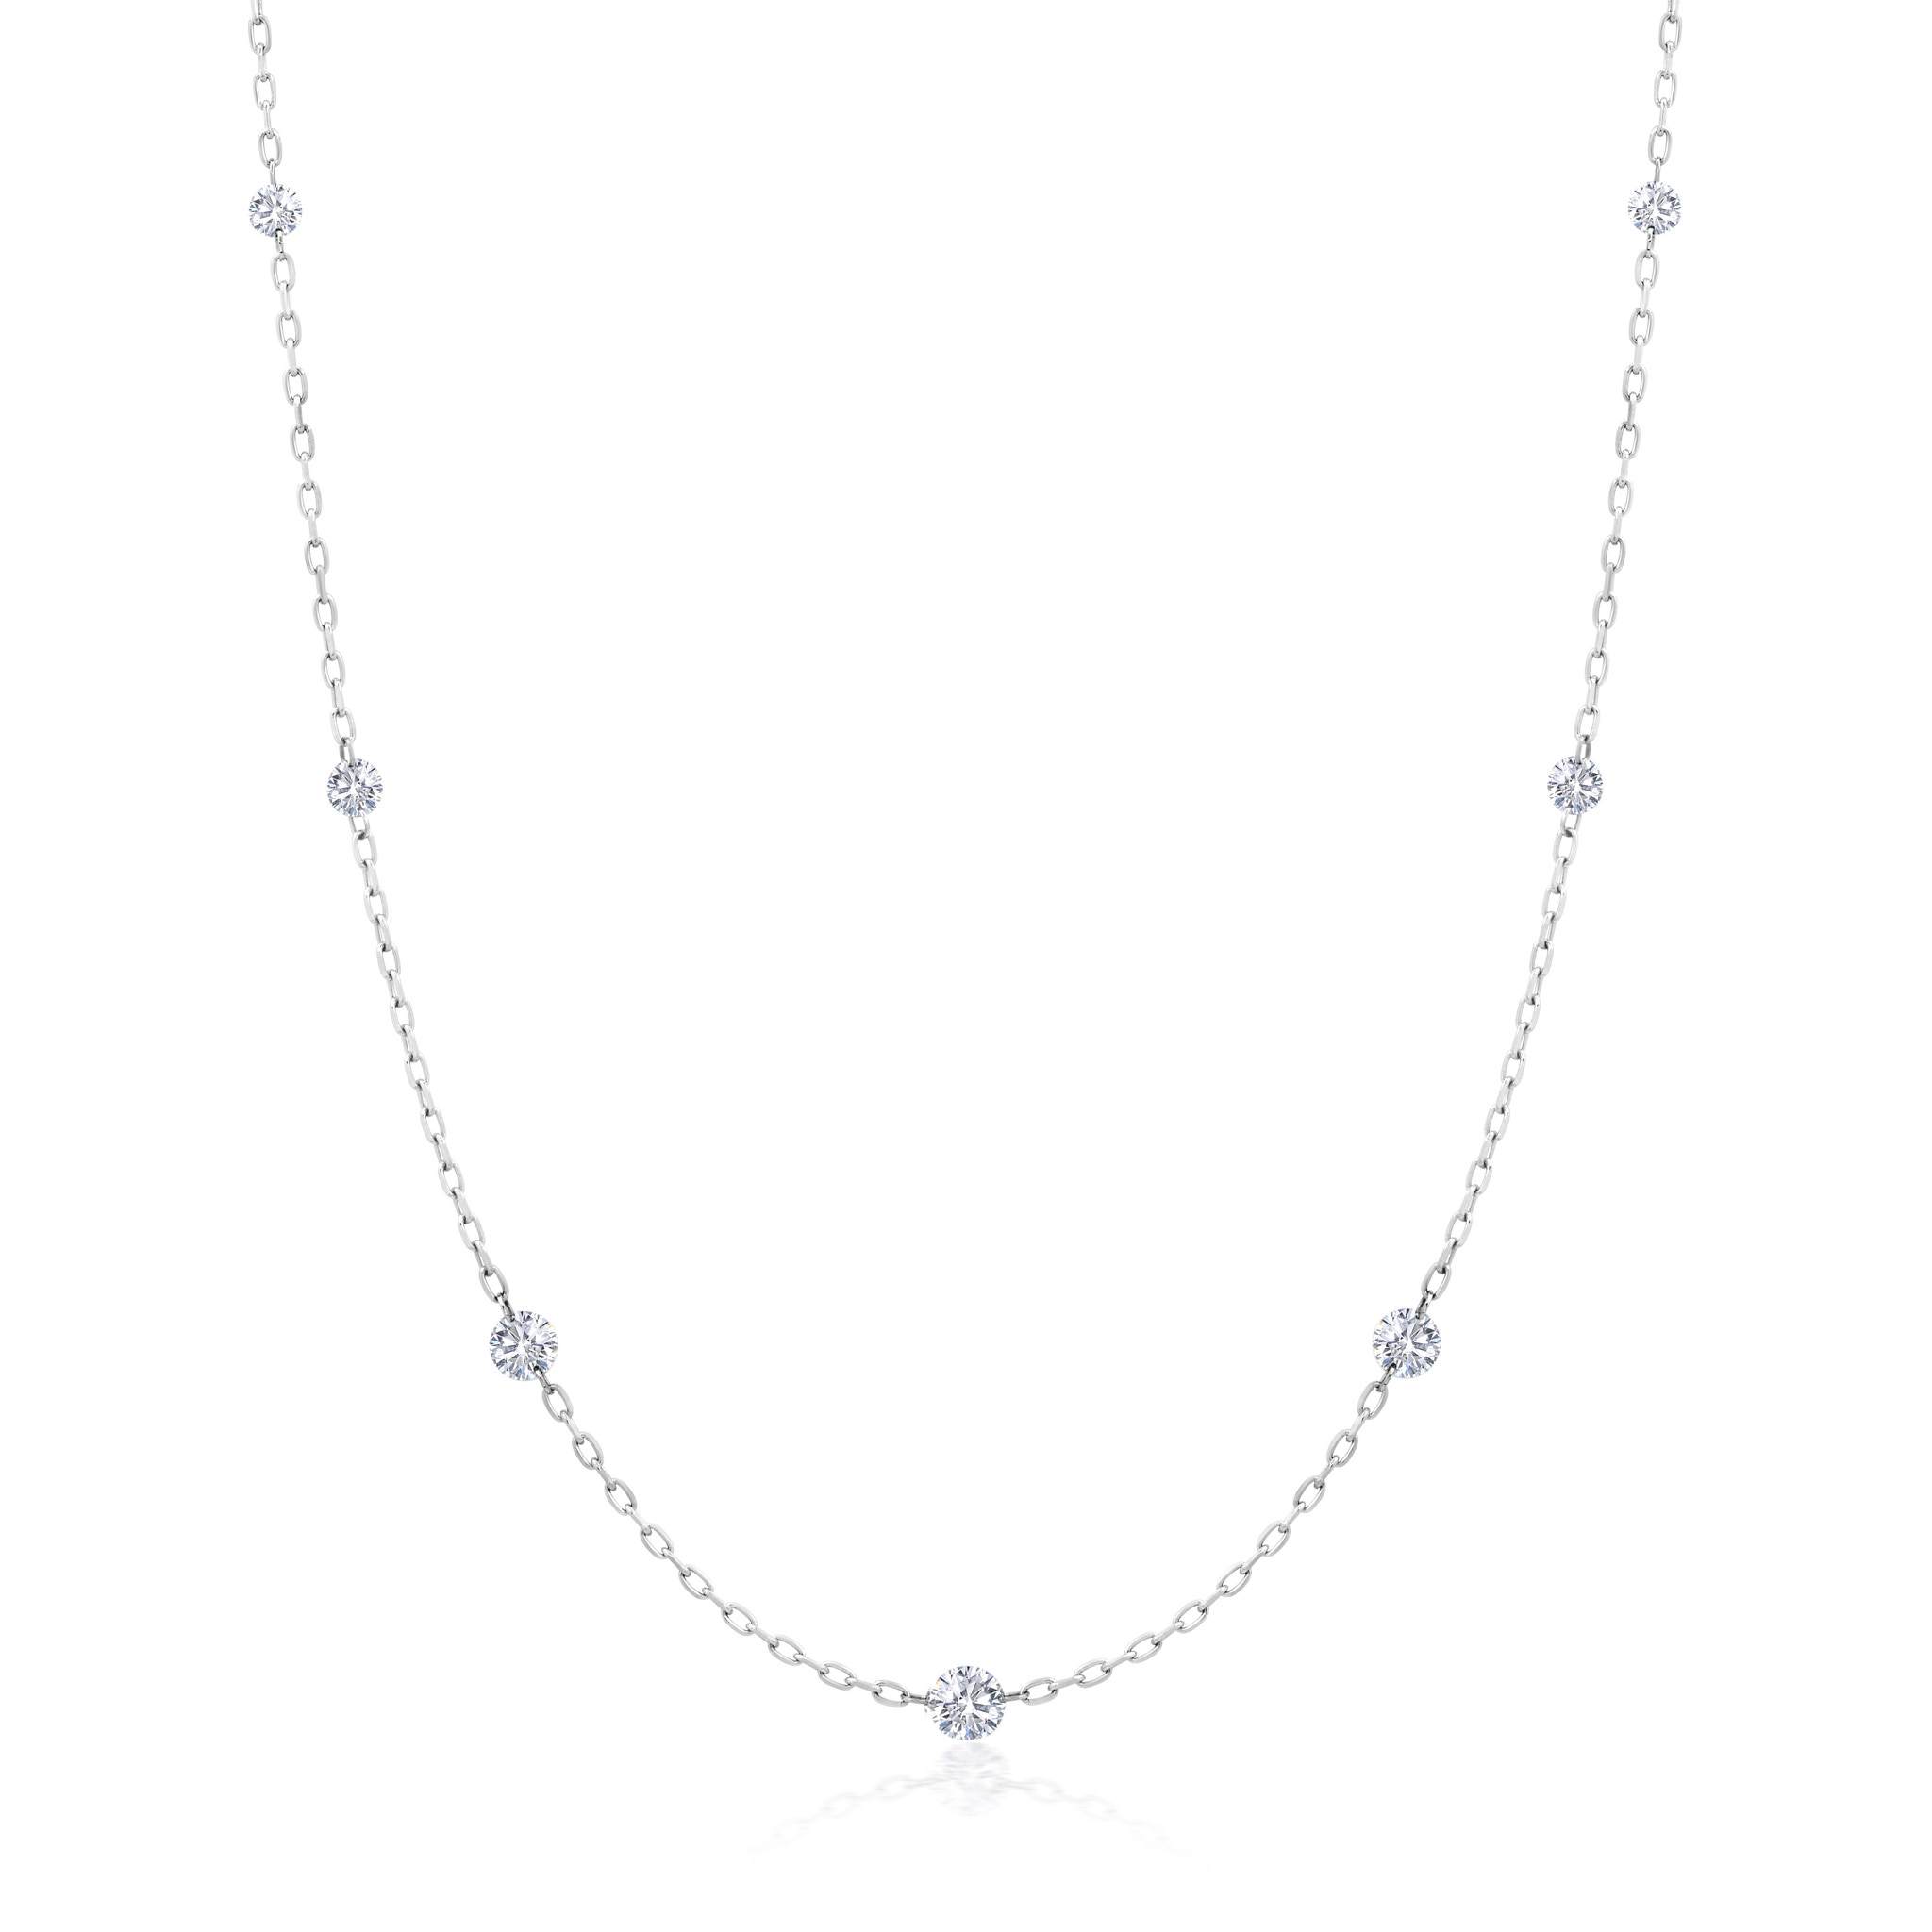 Graziela Gems - Necklace - 1/2 Ct Floating Diamond Station Necklace - White Gold